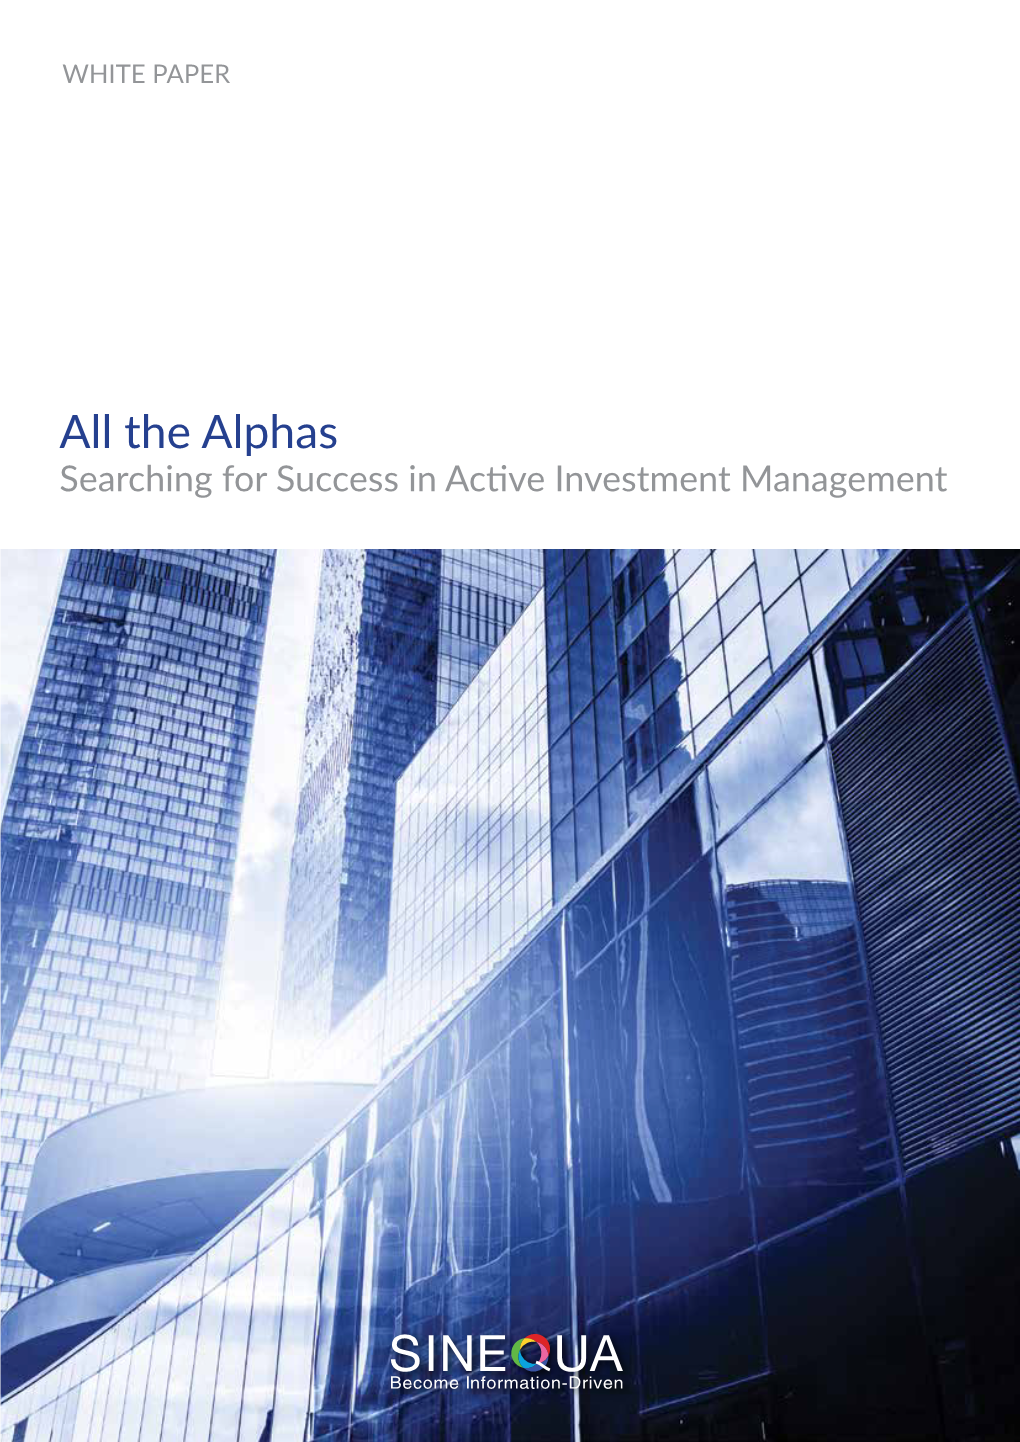 All the Alphas: Searching for Success in Active Investment